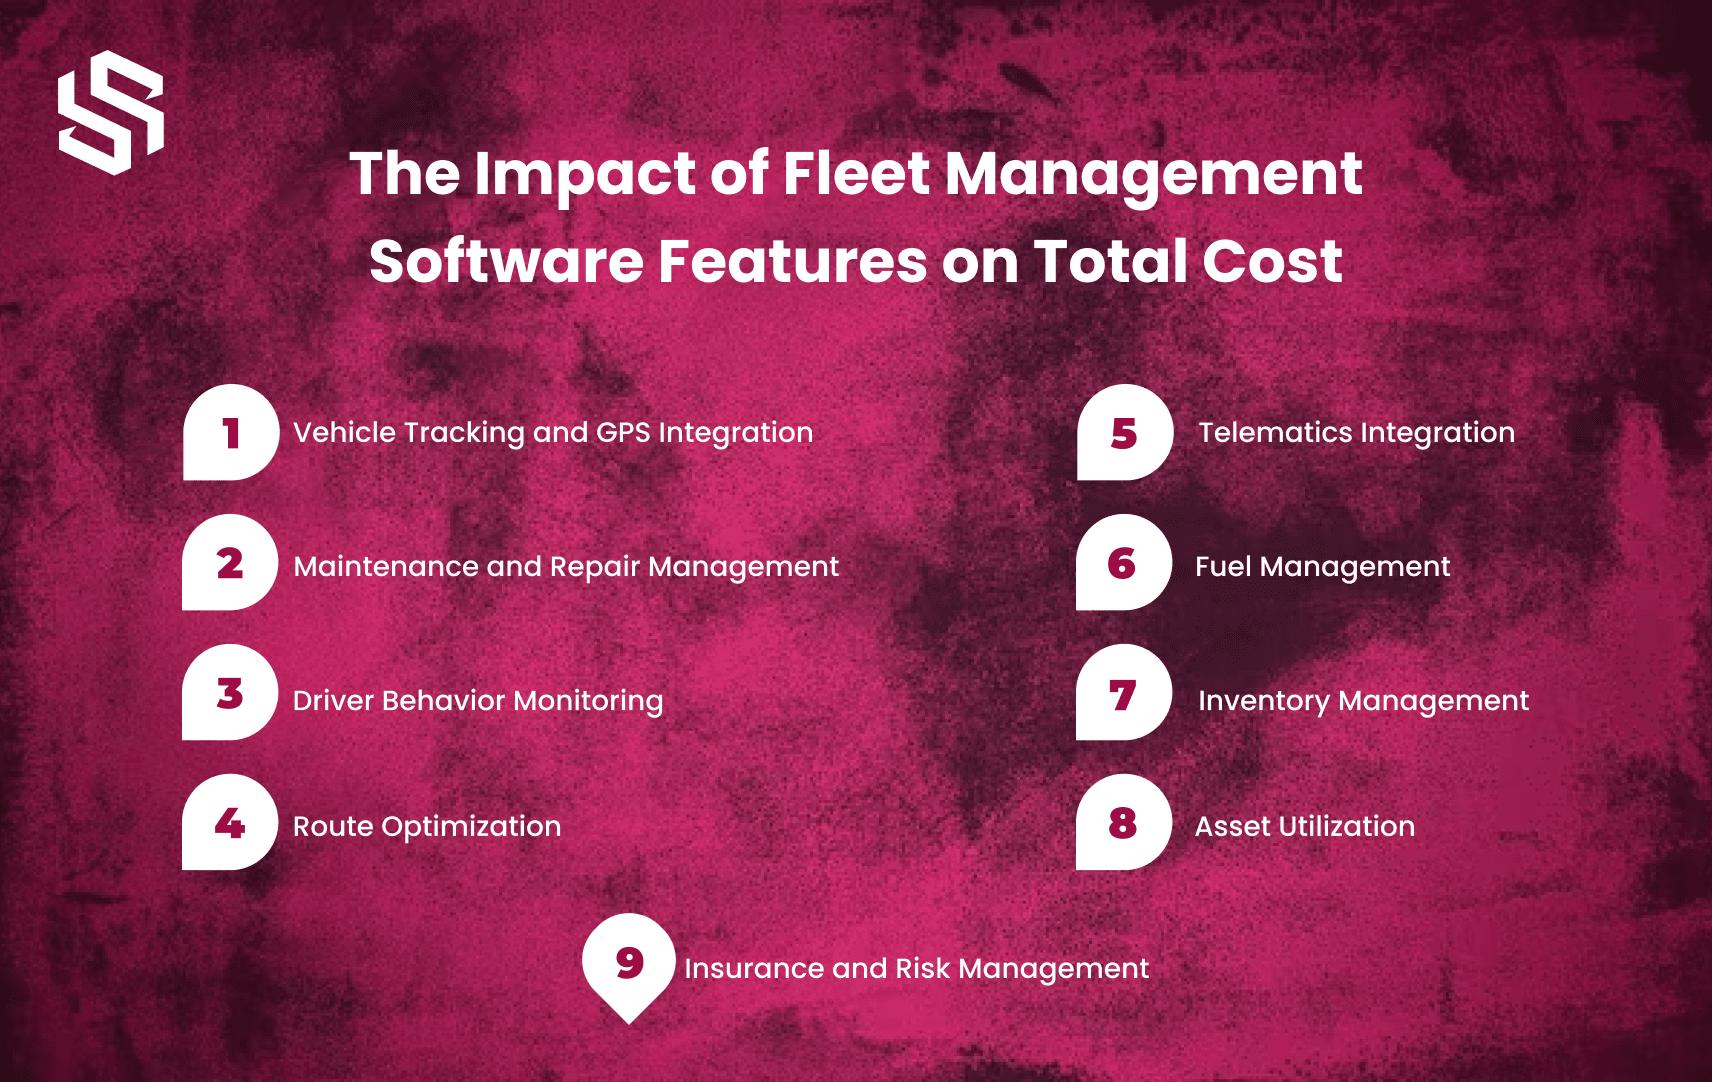 The Impact of Fleet Management Software Features on Total Cost